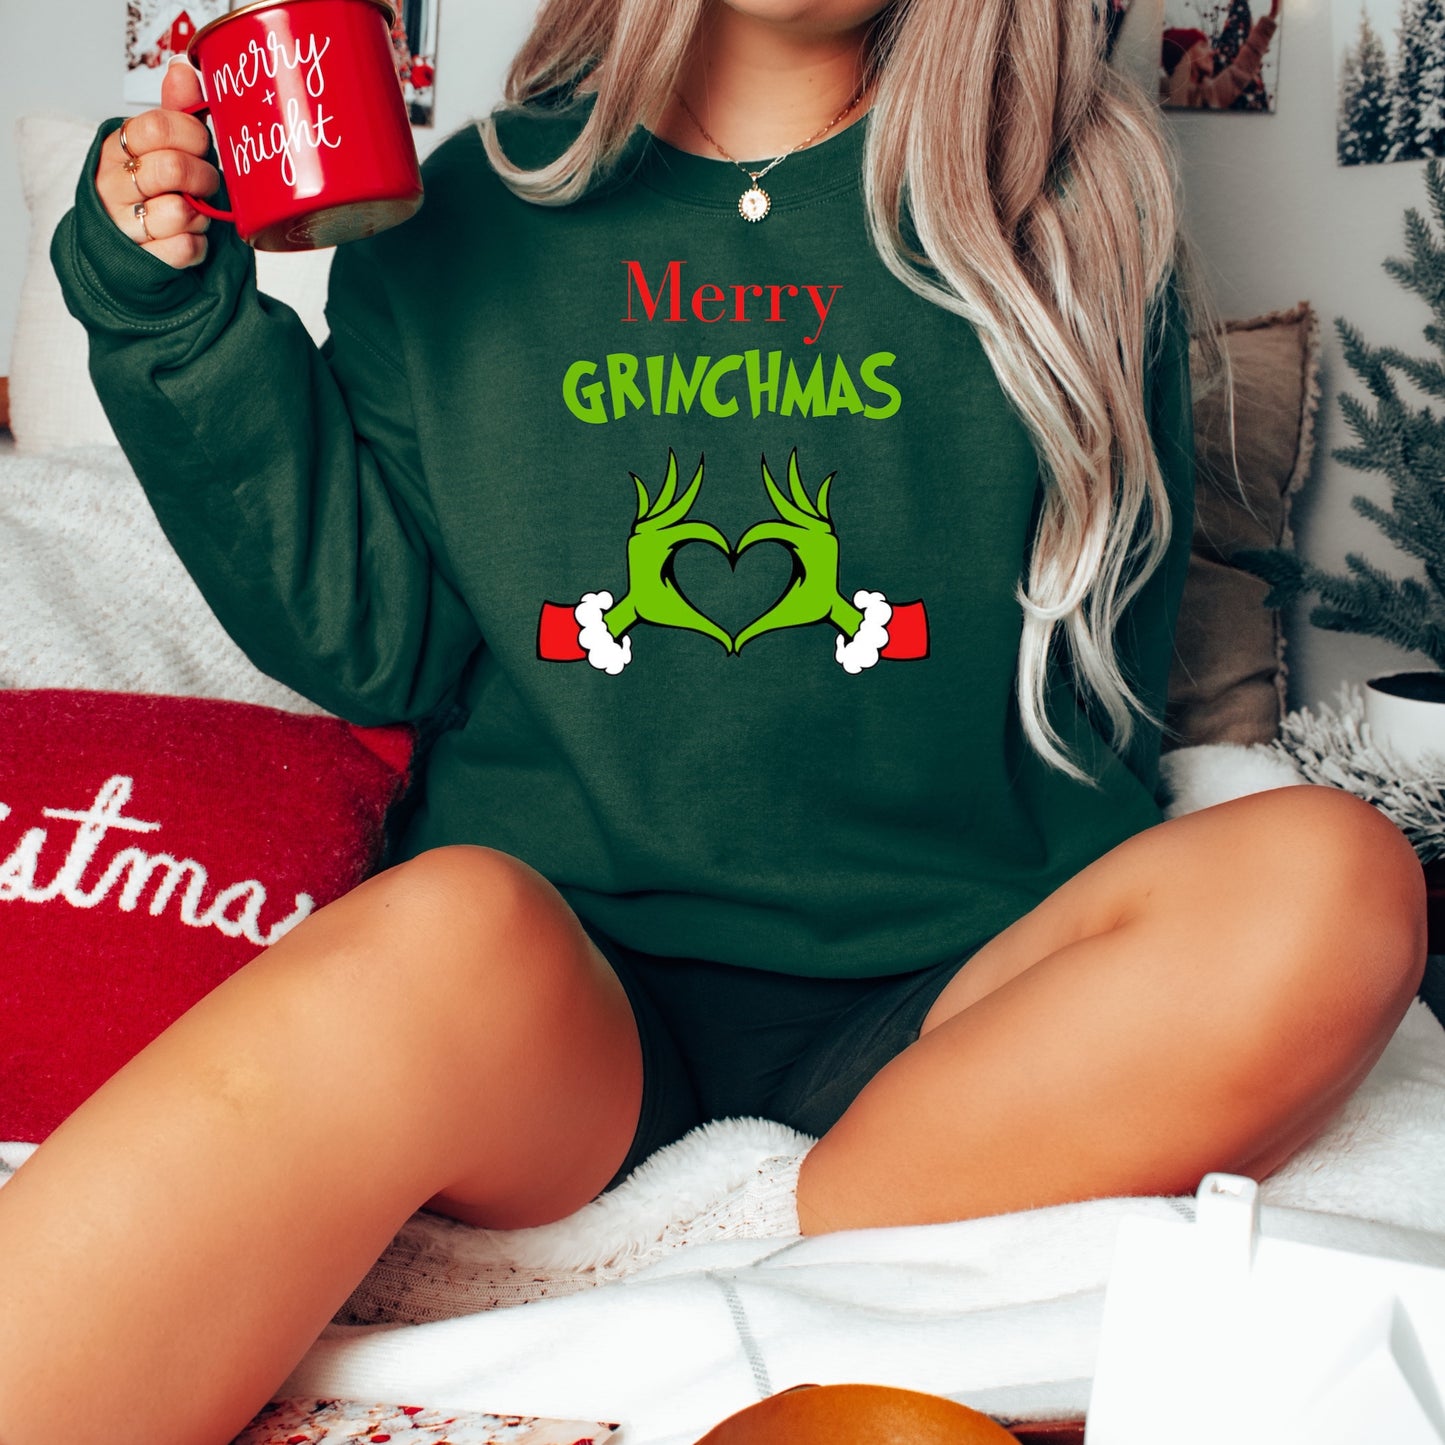 Christmas Character Iron on transfer with the phrase "Merry Grinchmas" - DTF Transfer - Sublimation Iron on Transfer - Christmas Iron on Transfers 